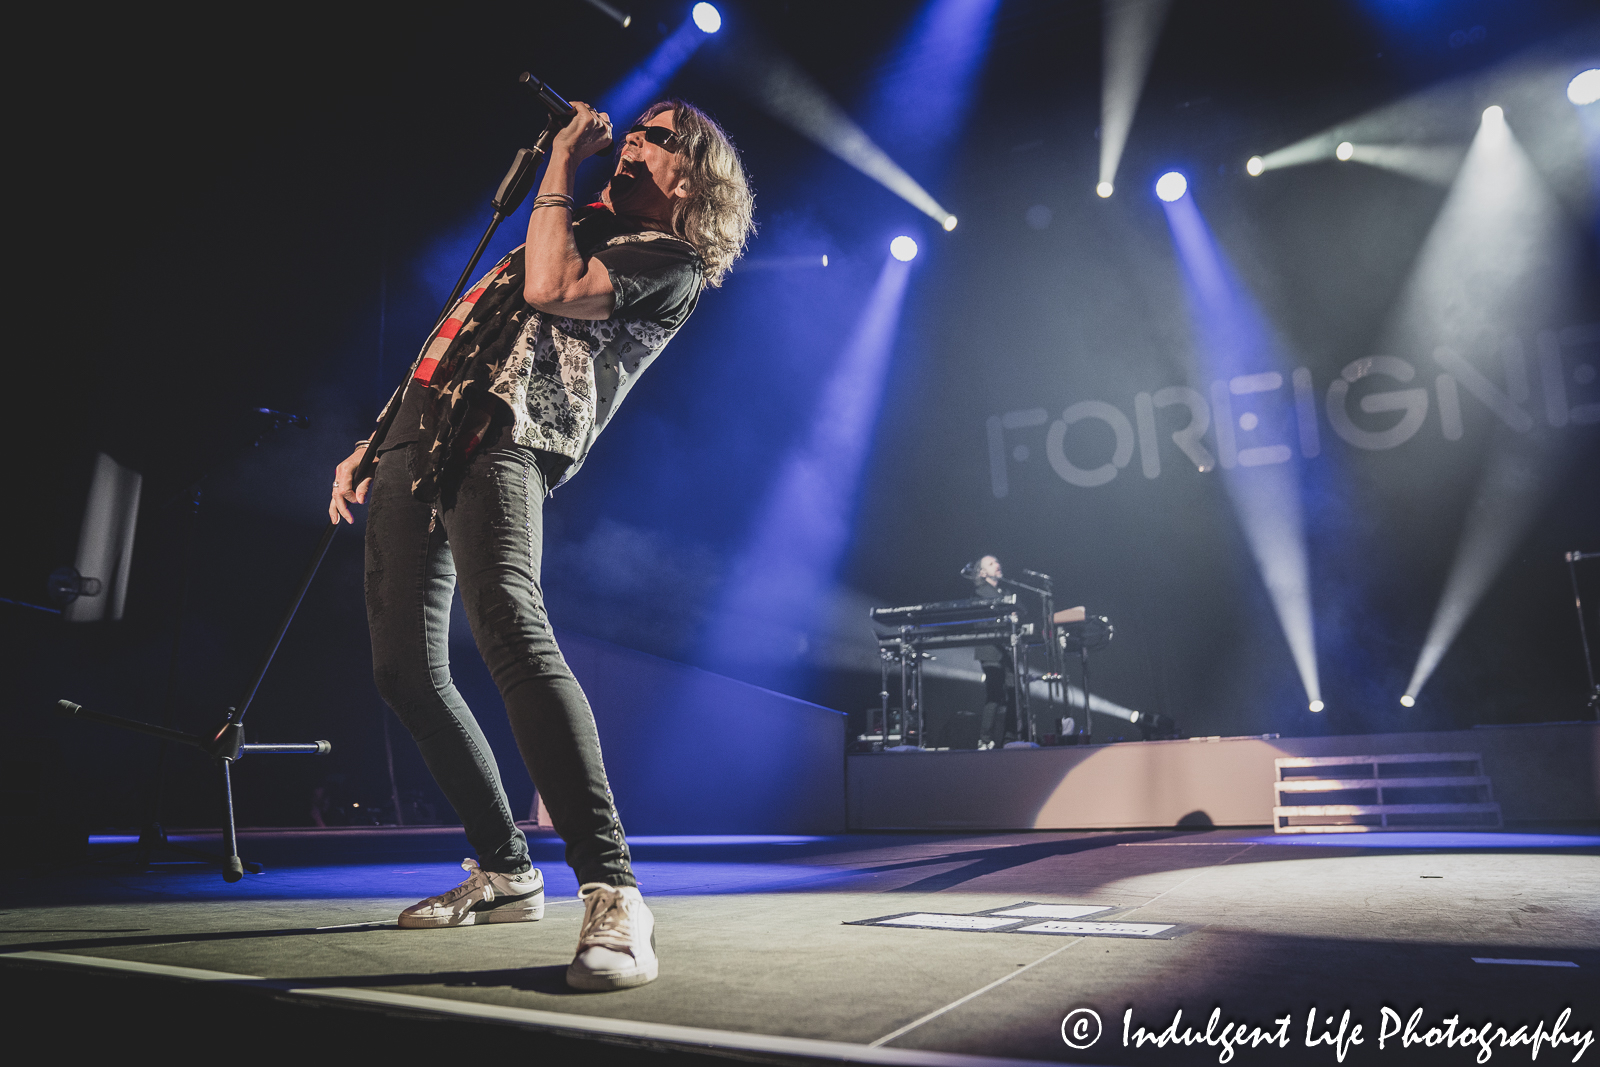 Lead vocalist Kelly Hansen of Foreigner performing "Head Games" with keyboard player Michael Bluestein at Hartman Arena in Park City, KS on April 30, 2023.